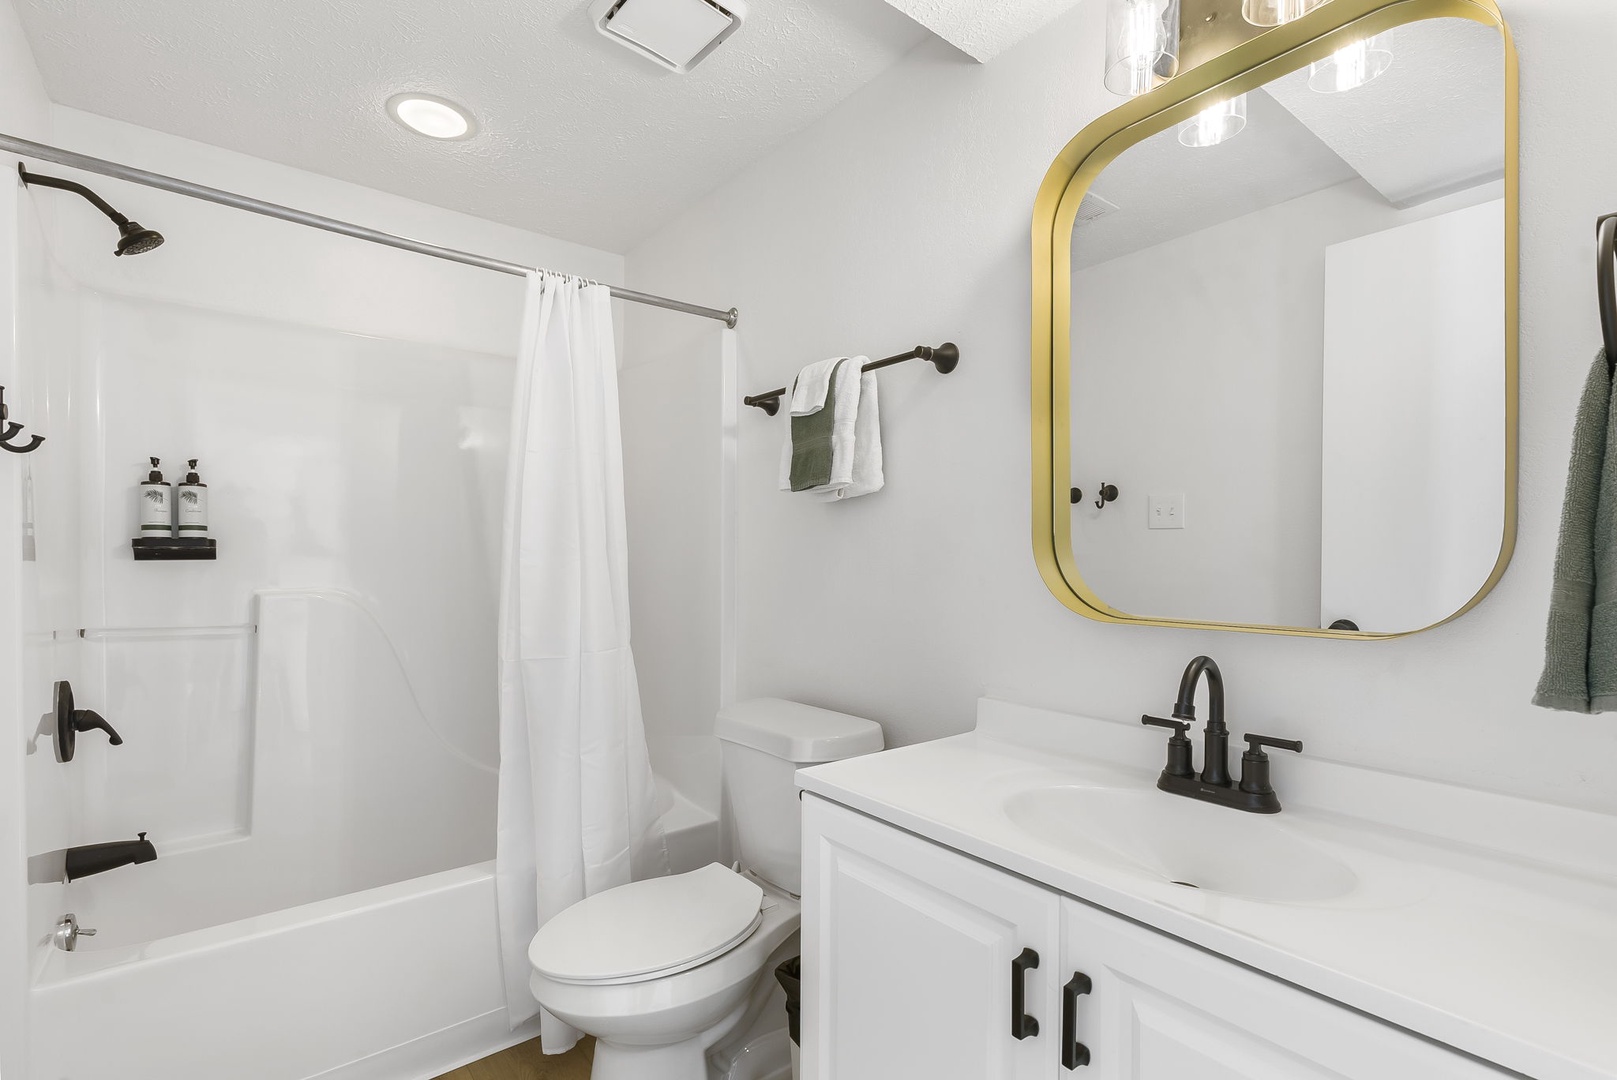 Unit 43: This 1st floor full bathroom includes a single vanity & shower/tub combo